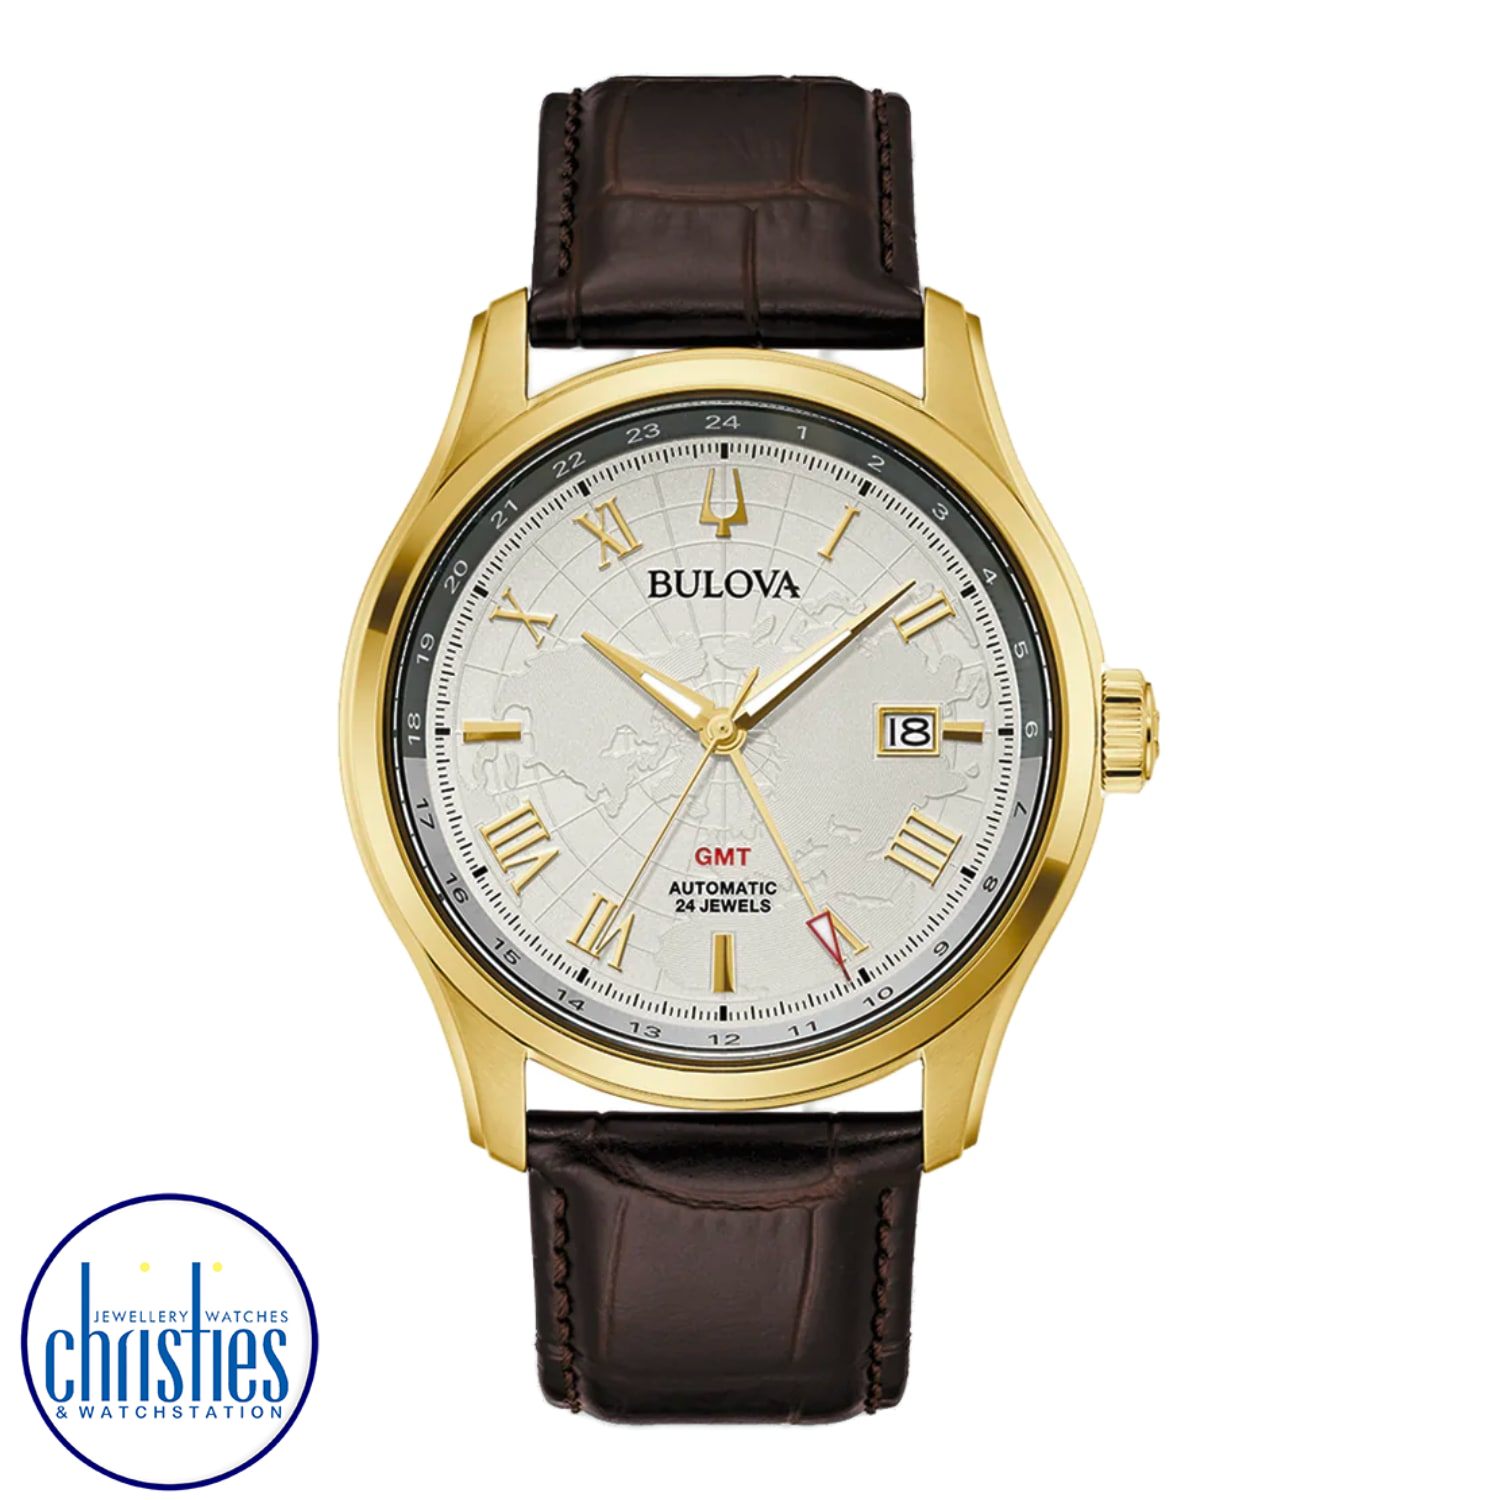 97B210 Bulova Men's Classic Wilton Watch. Timeless elegance is effortlessly combined with advanced GMT function in the luxurious, new Wilton Automatic timepiece from the Bulova Classic collection.